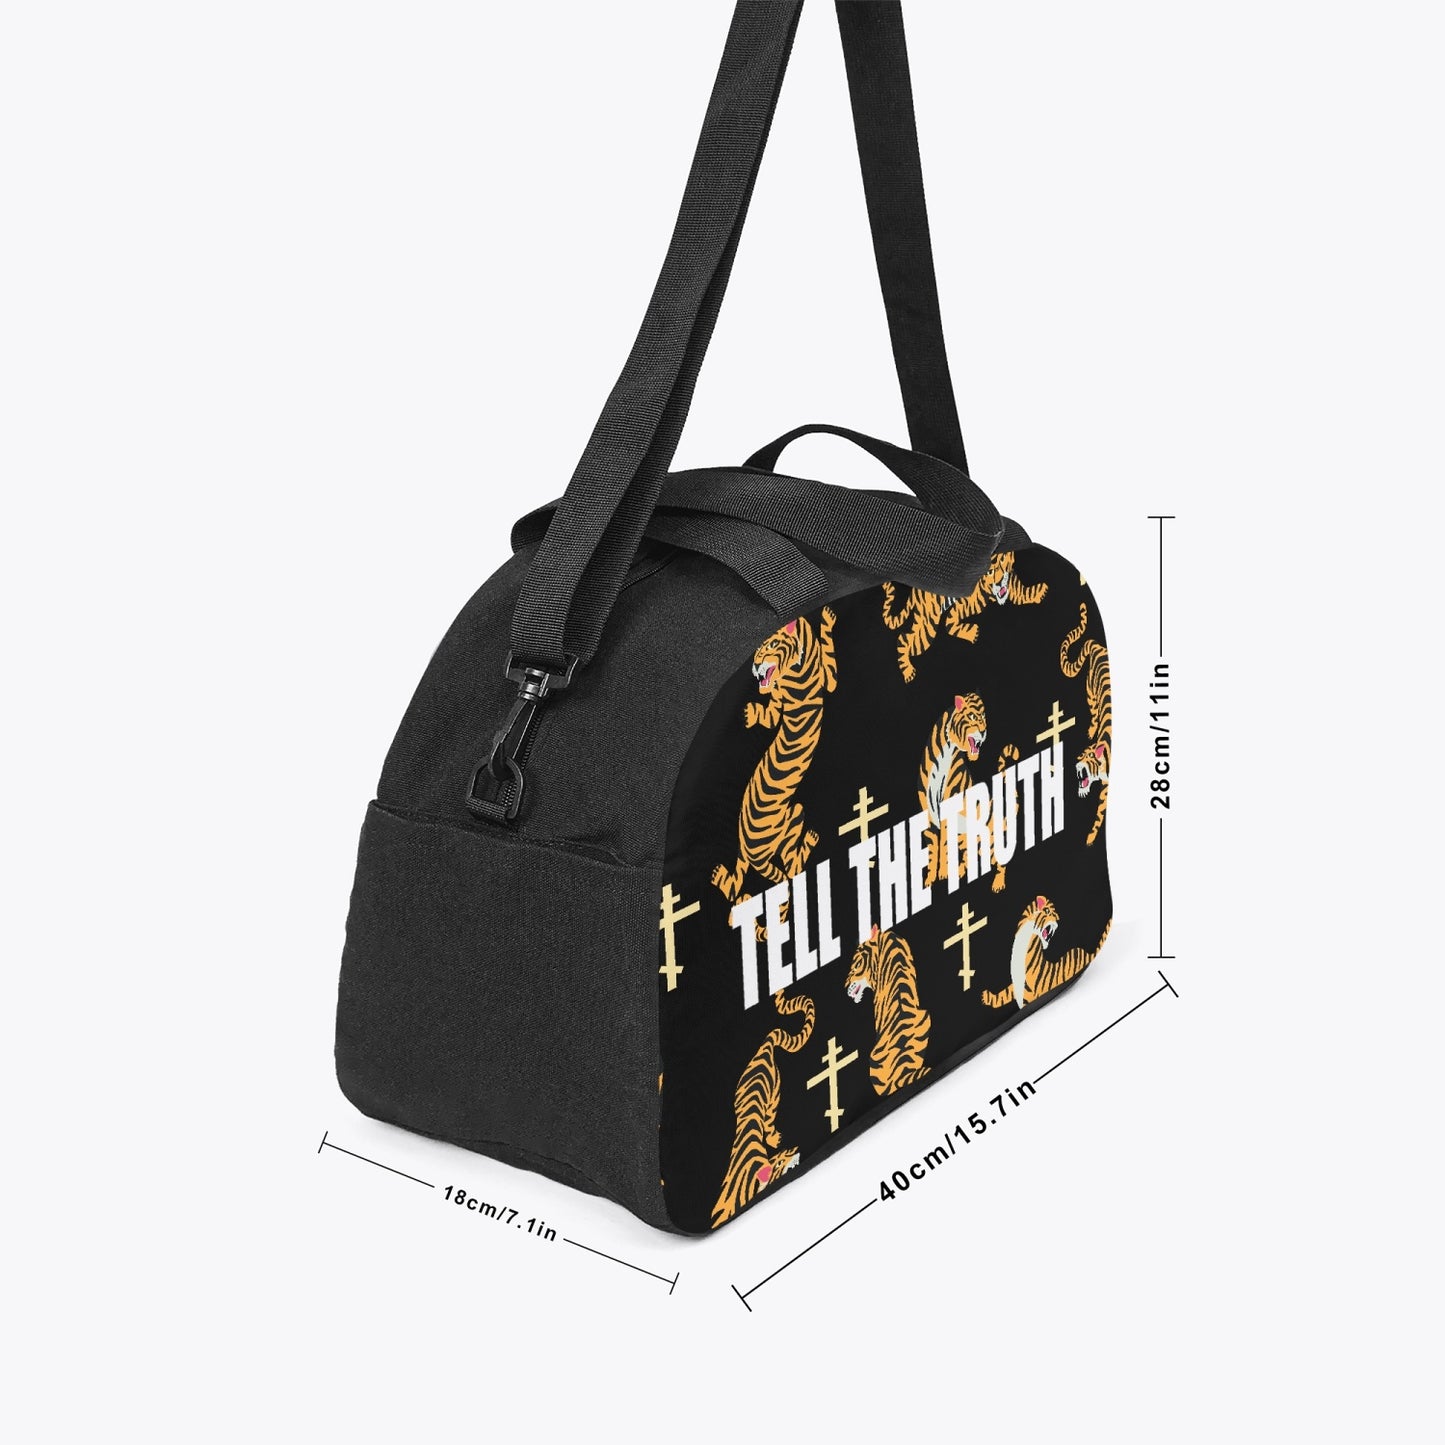 TELL THE TRUTH  Travel Luggage Bag